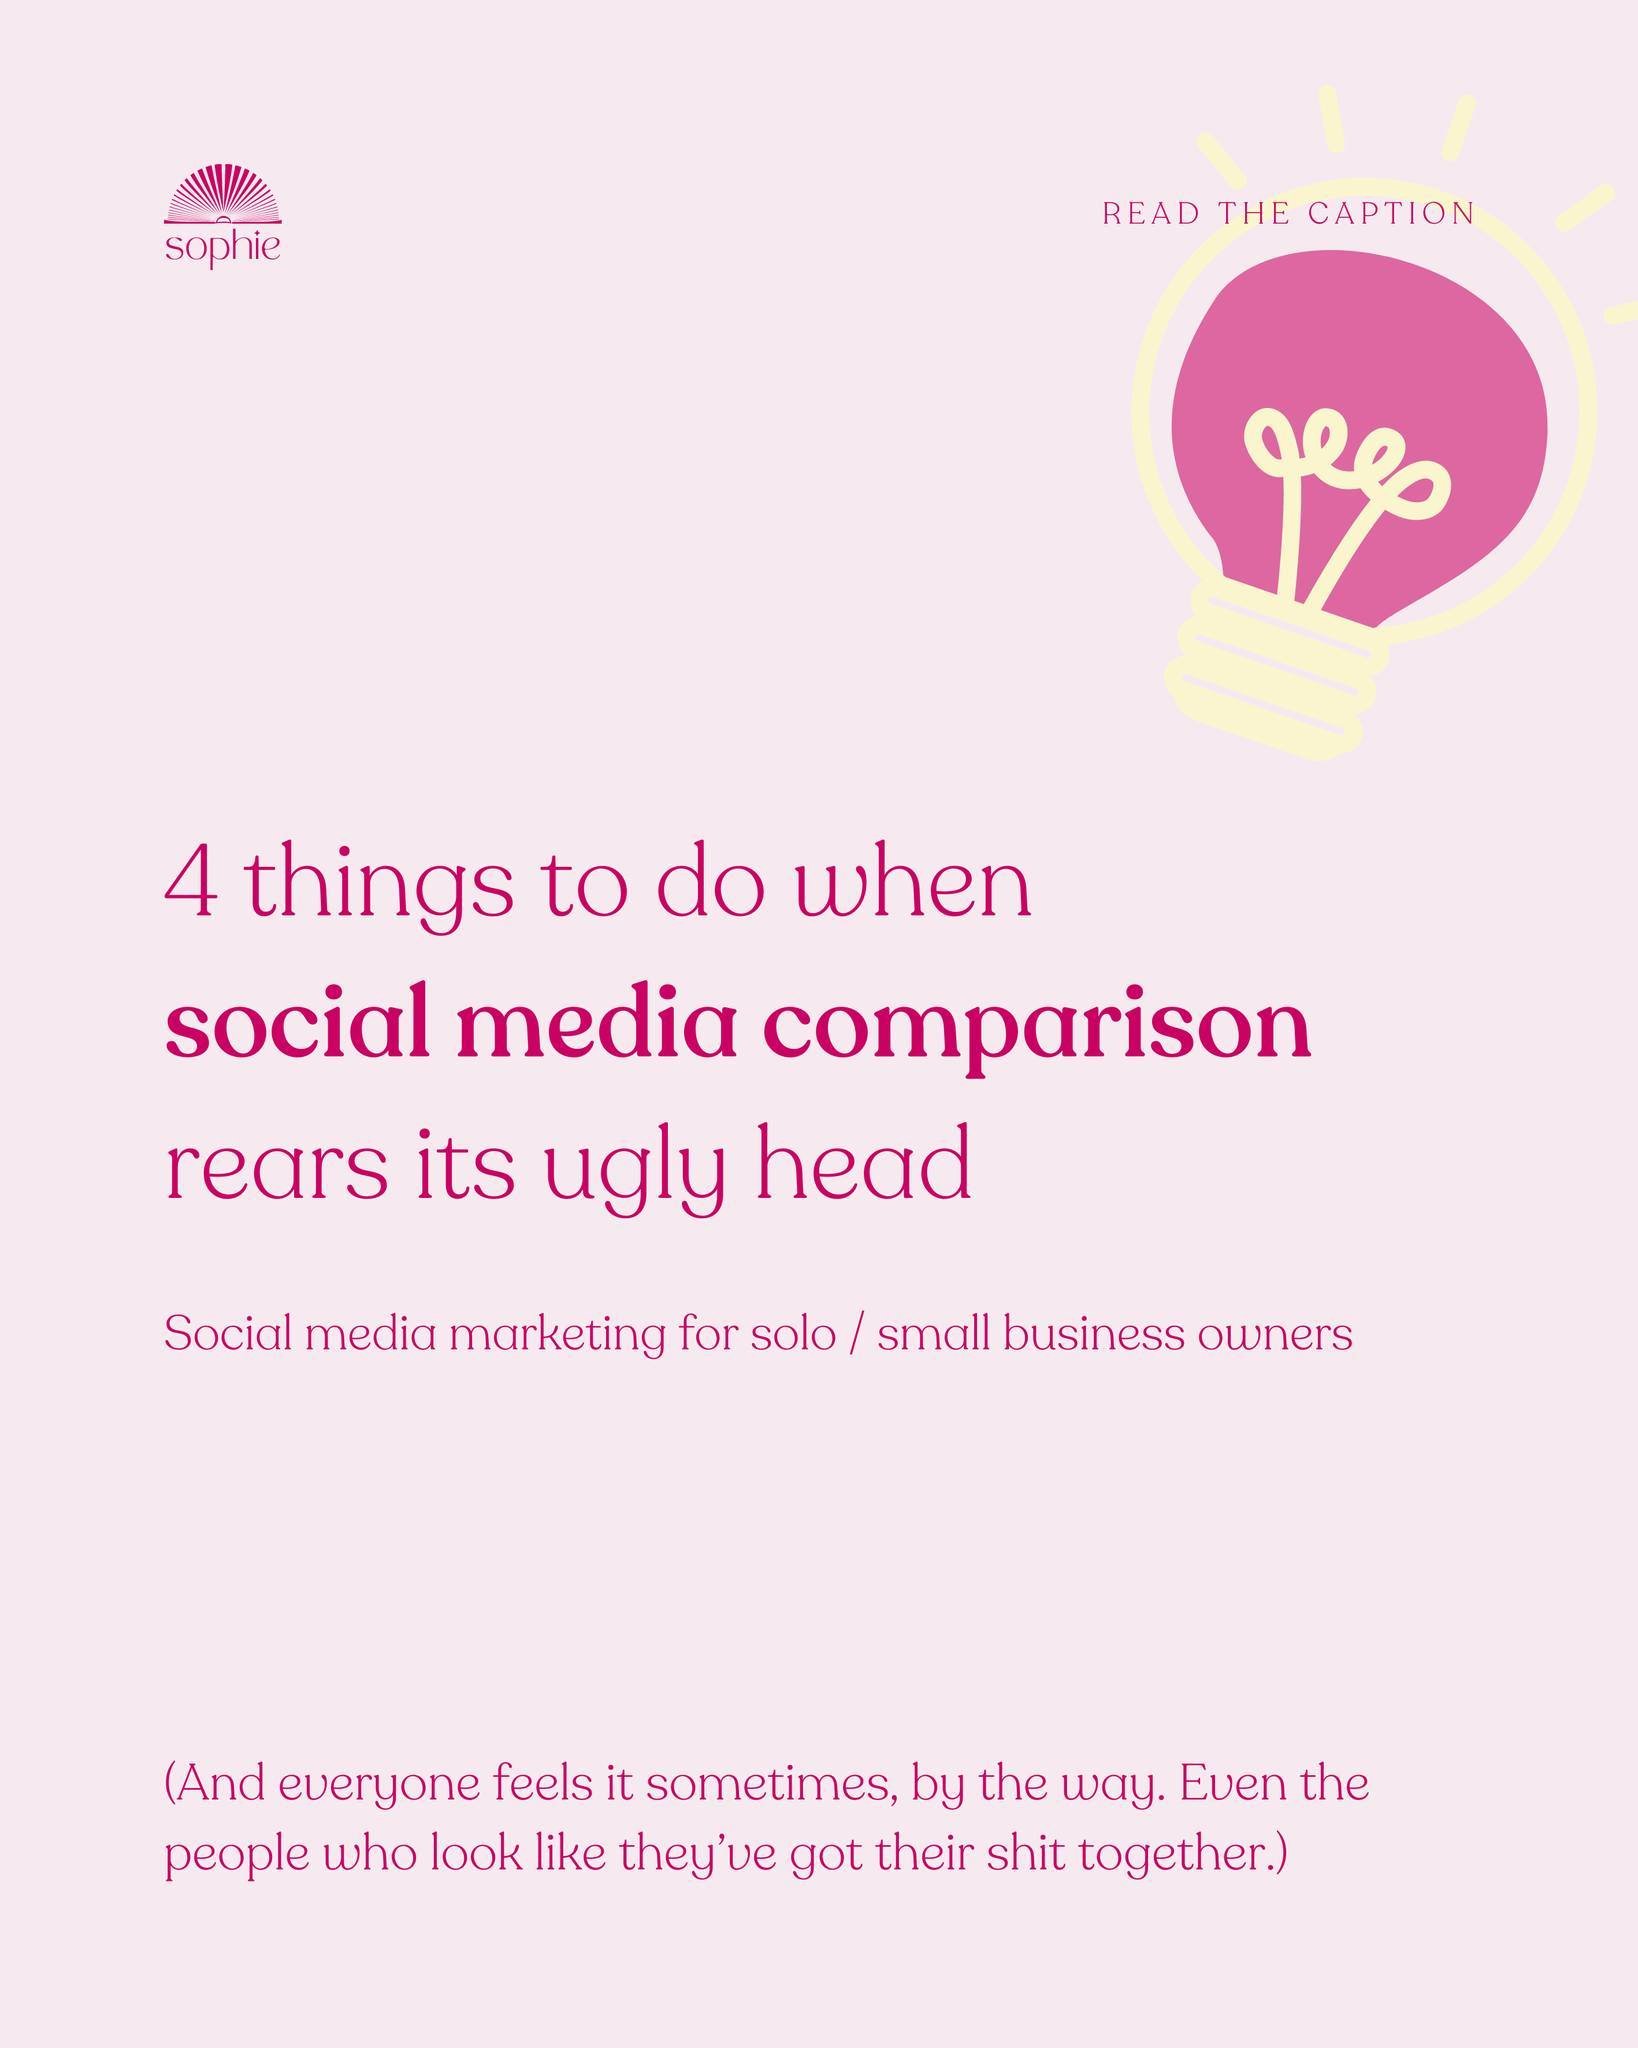 Do you ever compare your business content to others on social media? Ever give yourself a hard time for not doing more/better? Here are 4 things I find helpful when dealing with social media comparison:

💡 1. Taking time away from social when that f